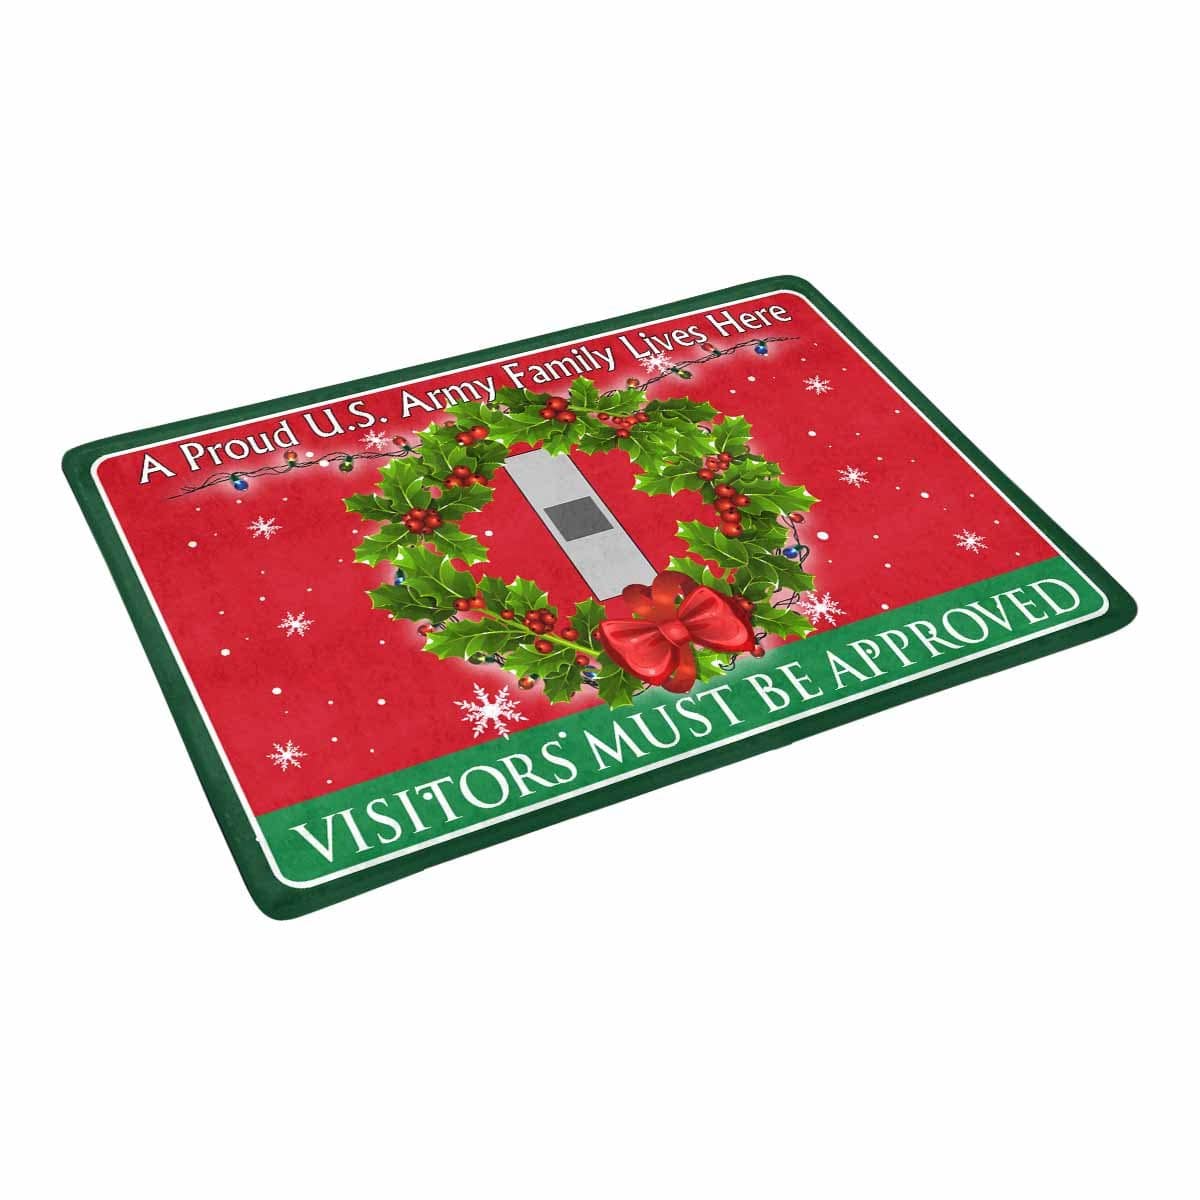 US Army W-1 Warrant Officer 1 W1 WO1 Warrant Officer Ranks - Visitors must be approved Christmas Doormat-Doormat-Army-Ranks-Veterans Nation